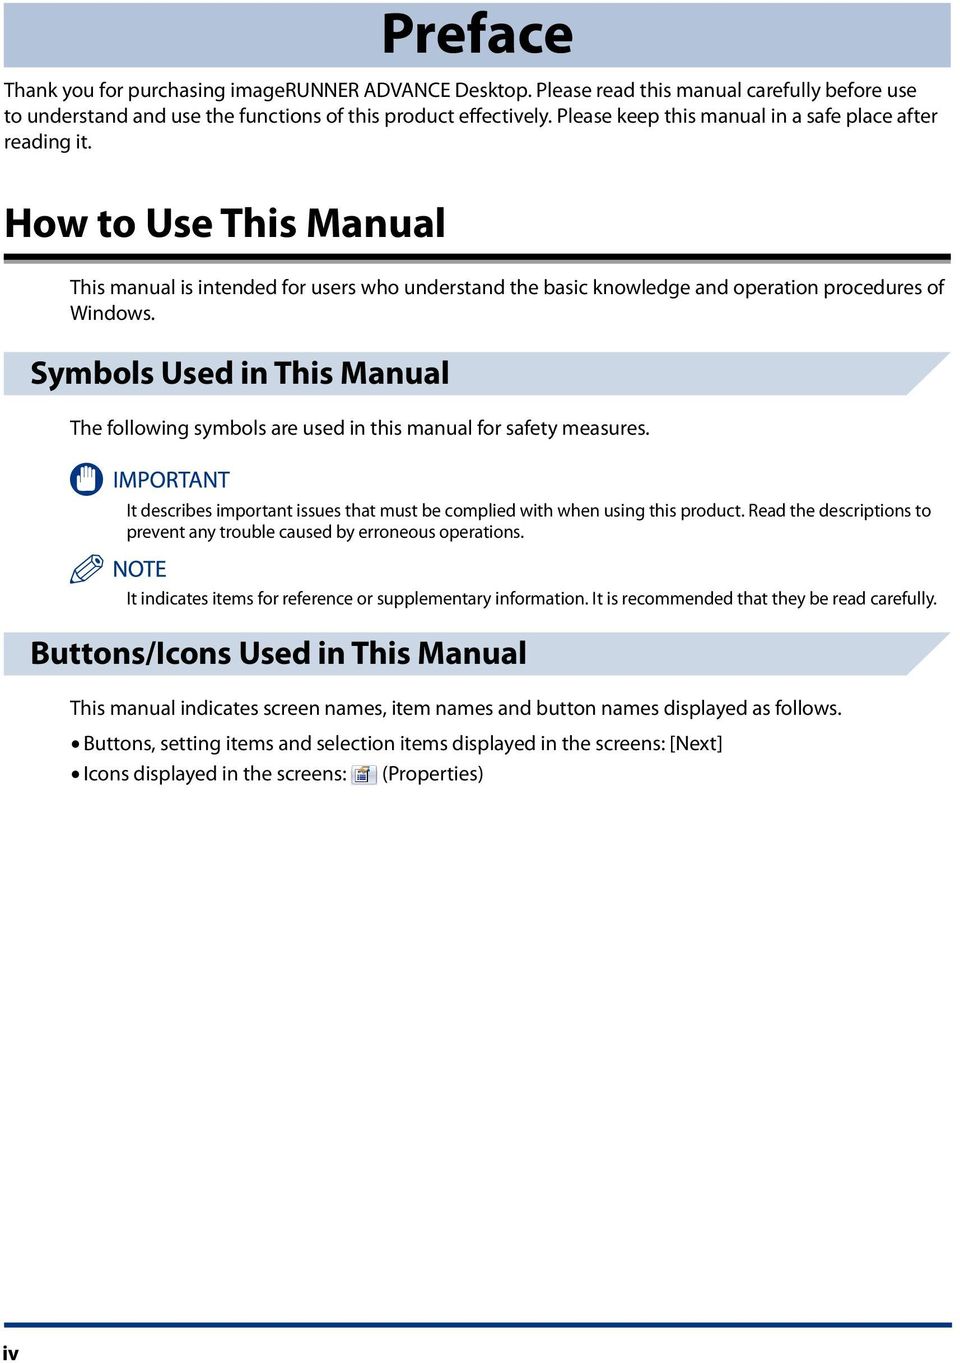 Symbols Used in This Manual The following symbols are used in this manual for safety measures. It describes important issues that must be complied with when using this product.